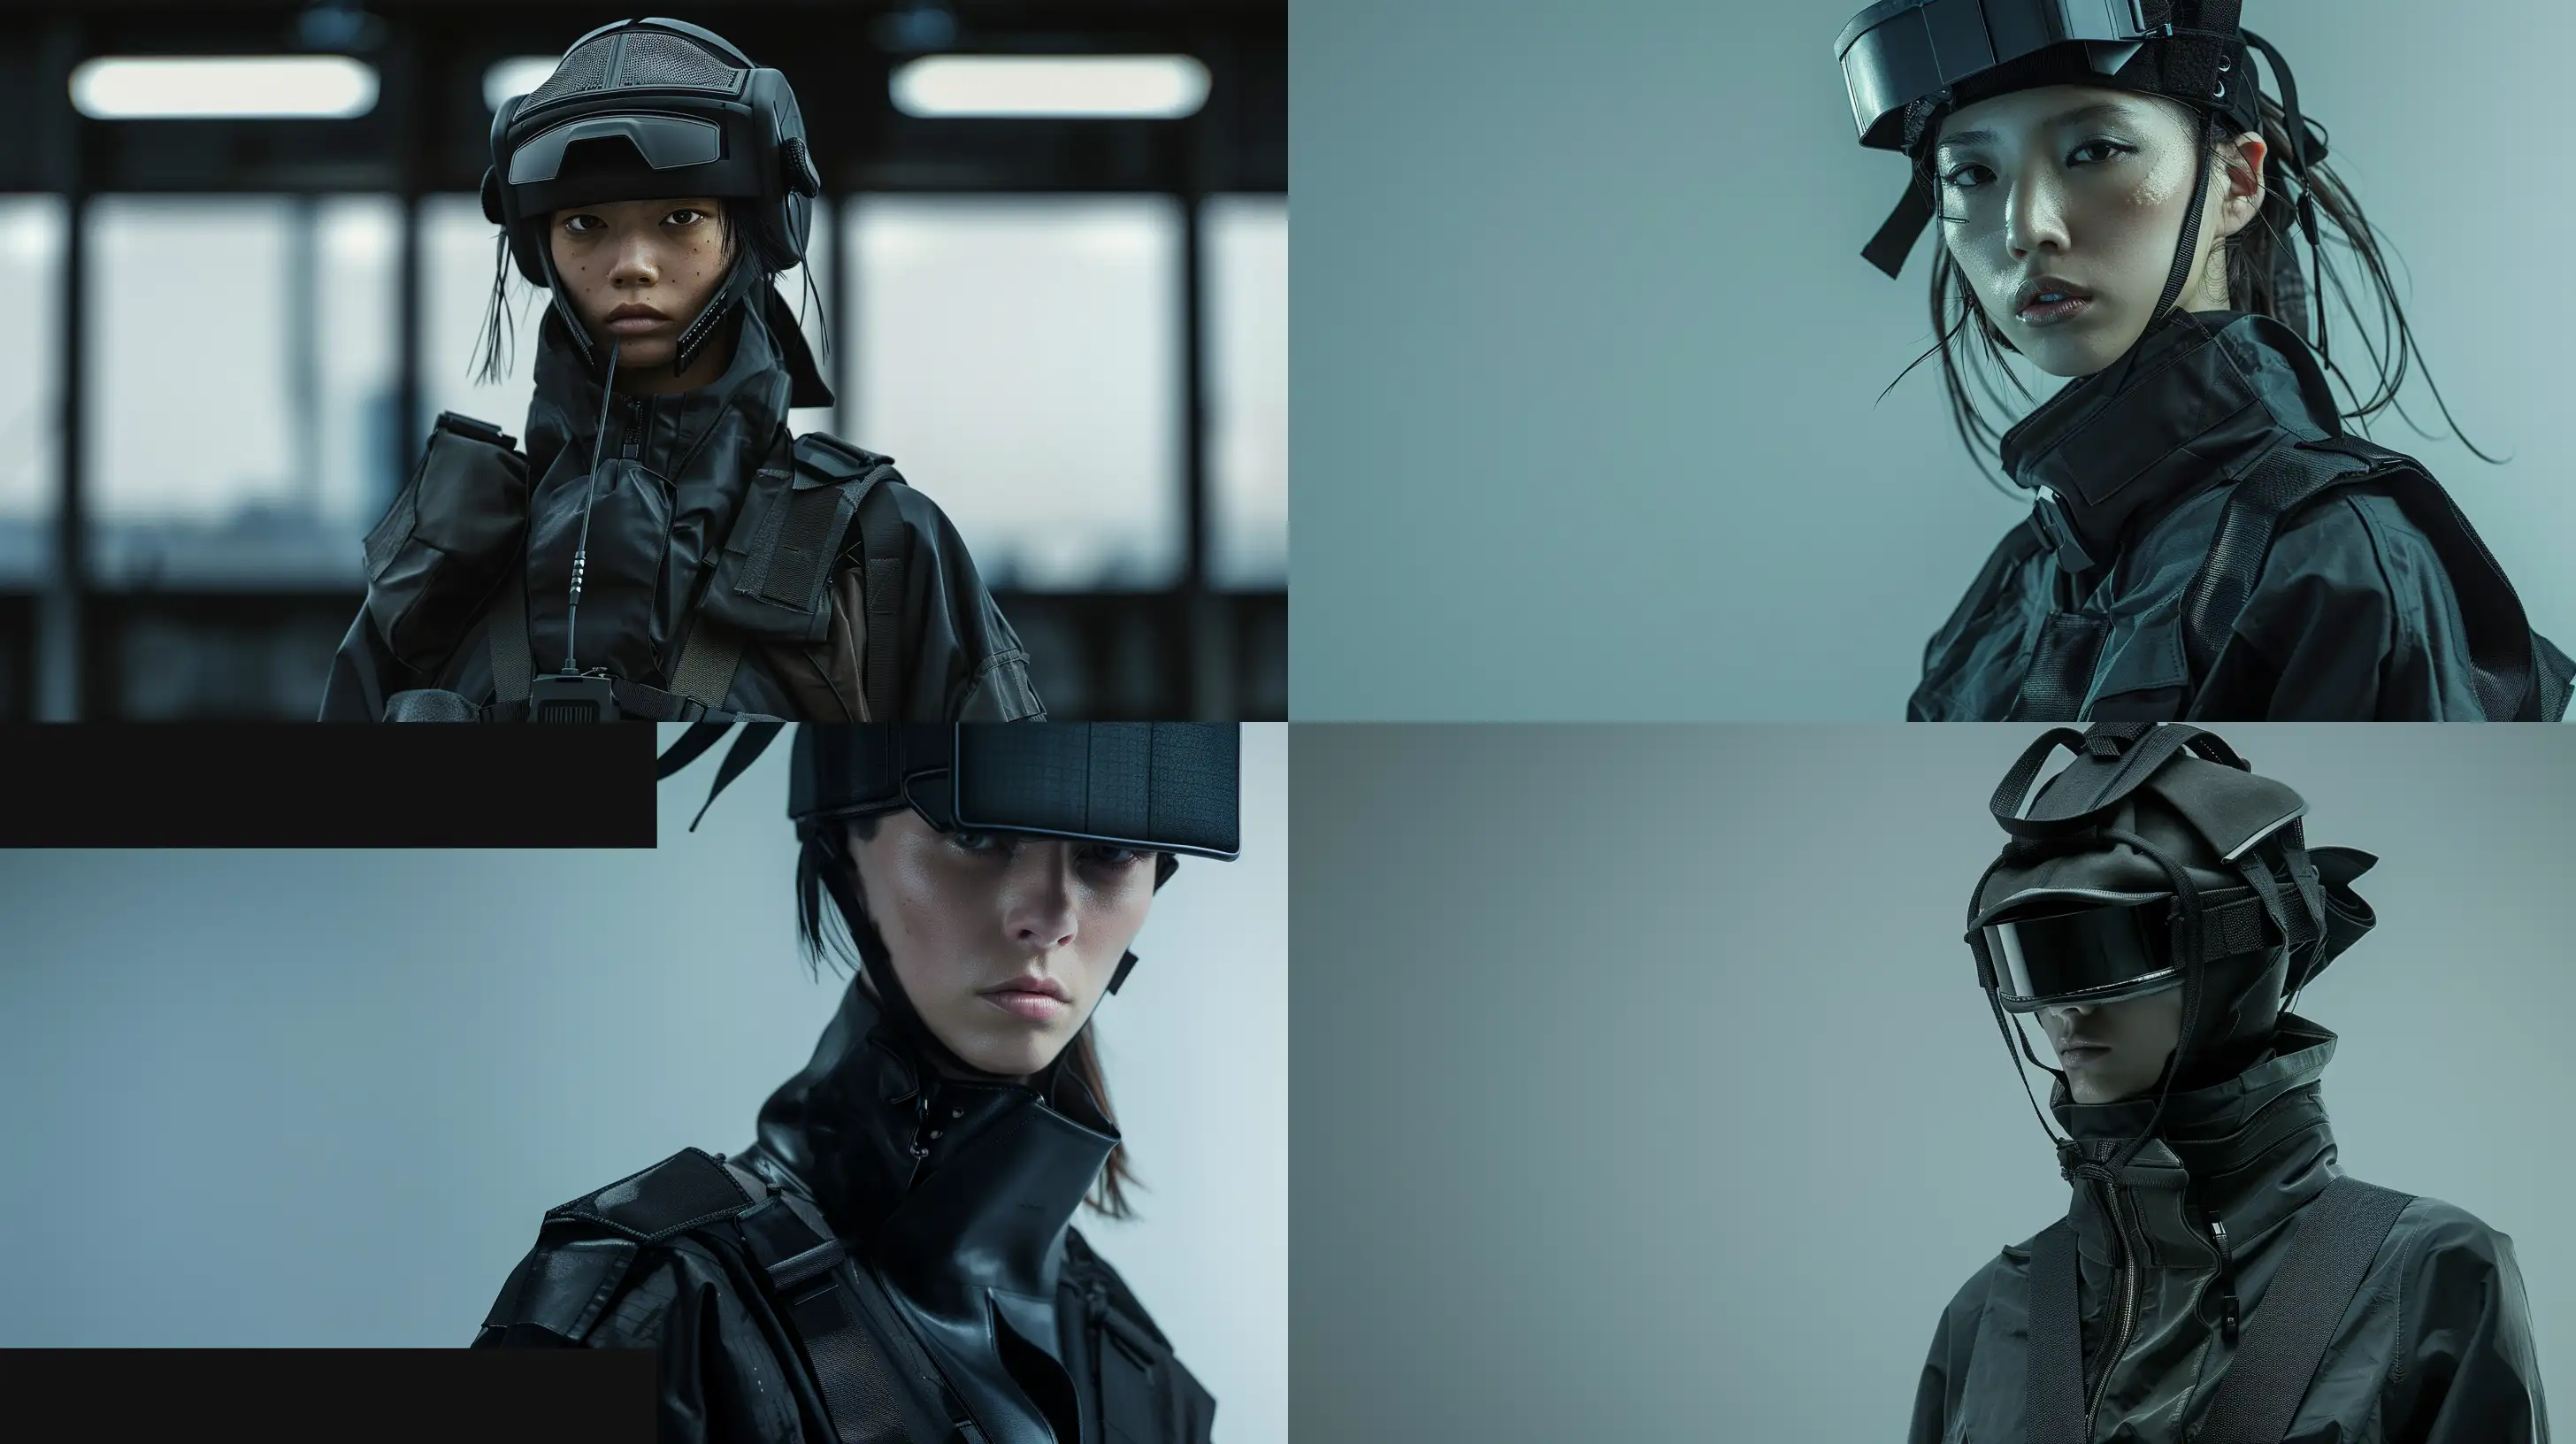 fashion photography, futuristic military fashion outfit with a headpiece, dark color palette with clean background, quality materials, captured by Hasselblad XID, --ar 16:9 --style raw